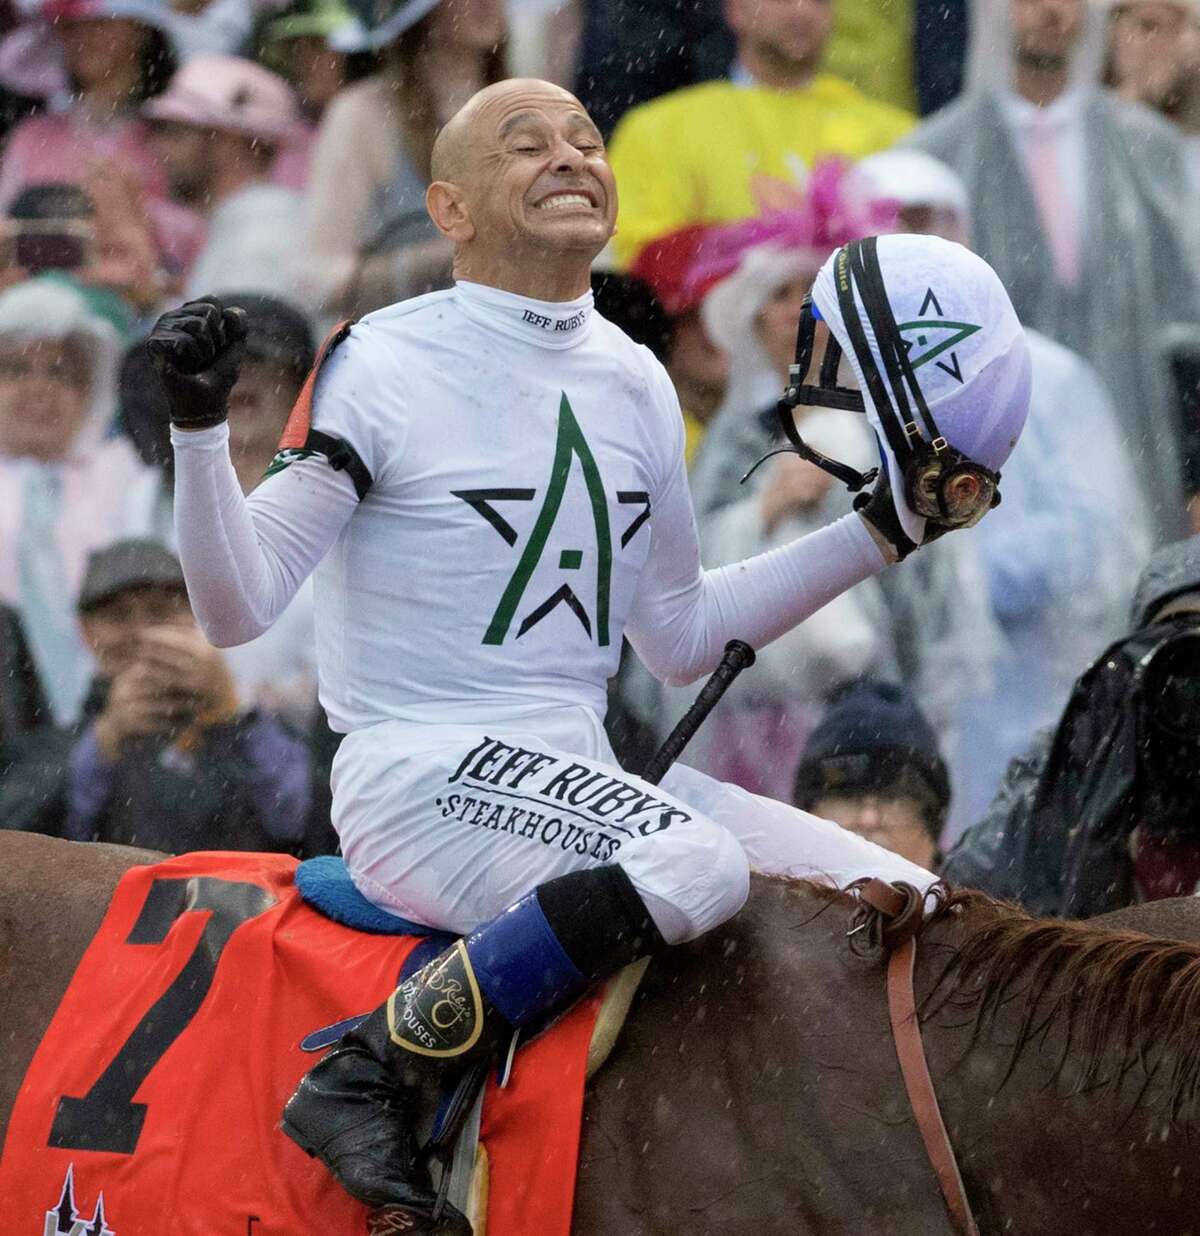 Justify with jockey Mike Smith is all smiles as he heads to the winner's circle after winning the 144th running of the Kentucky Derby at Churchill Downs Saturday May 5, 2018 in Louisville, Kentucky (Skip Dickstein/Times Union)